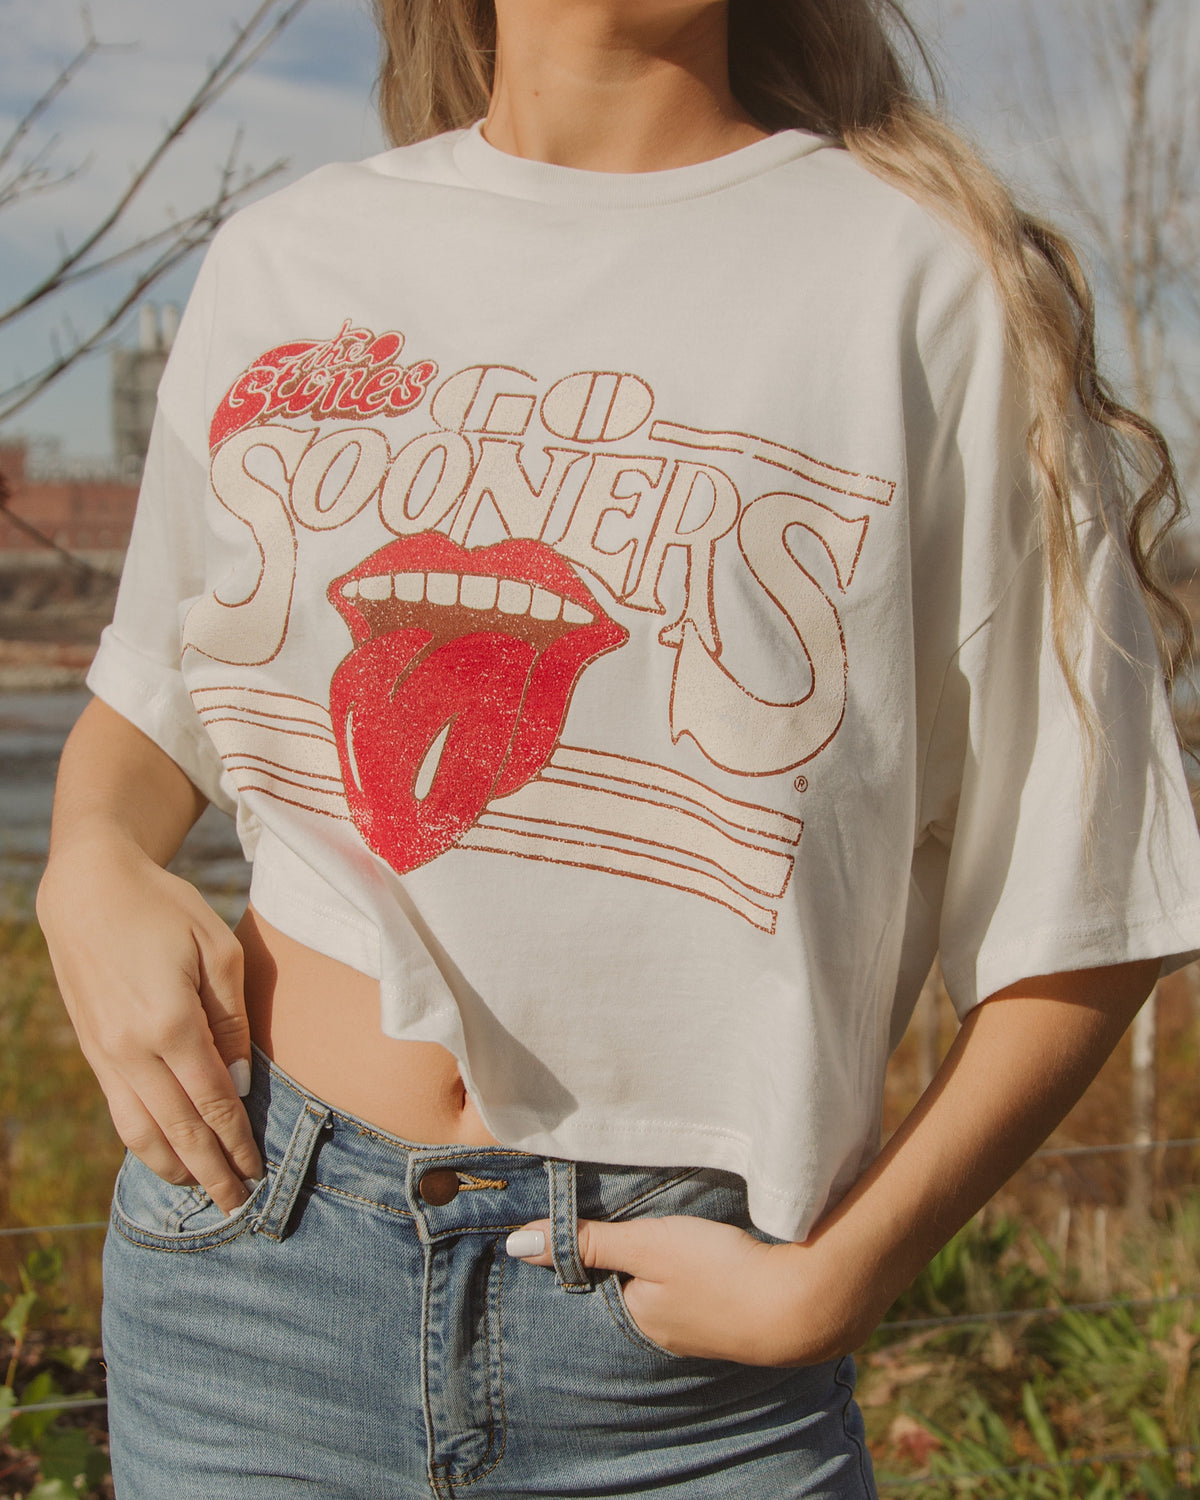 Rolling Stones OU Sooners Stoned White Cropped Tee - shoplivylu